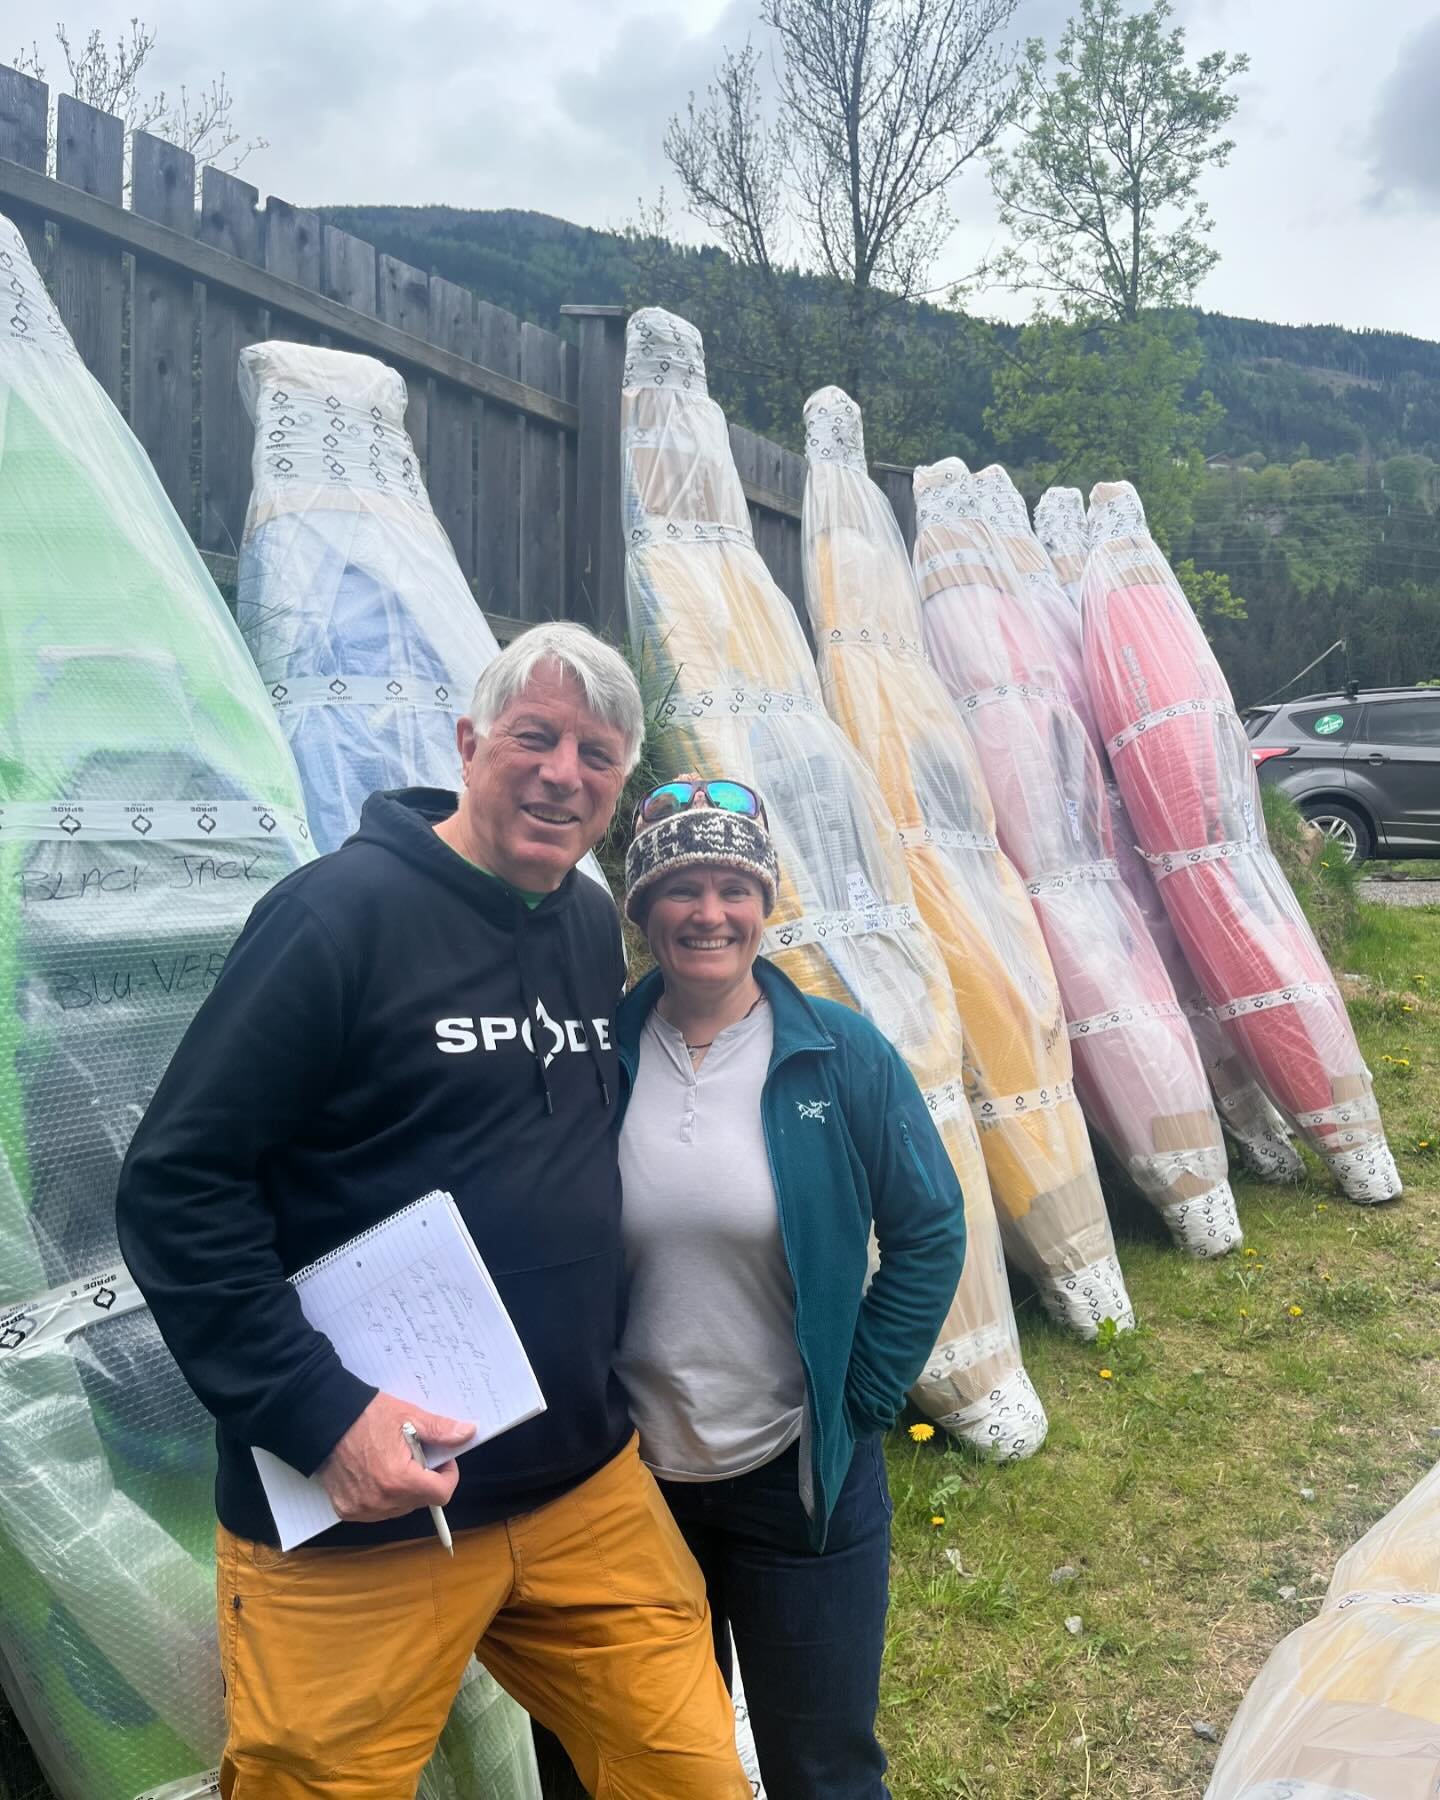 Yesterday we picked up some more @spade_kayaks for our kayak school. They are the perfect complement to our other core kayaking partner. It was also great to catch up with Hans and to see his new store by the banks of the Isel River. 
.
.
#spadegang 